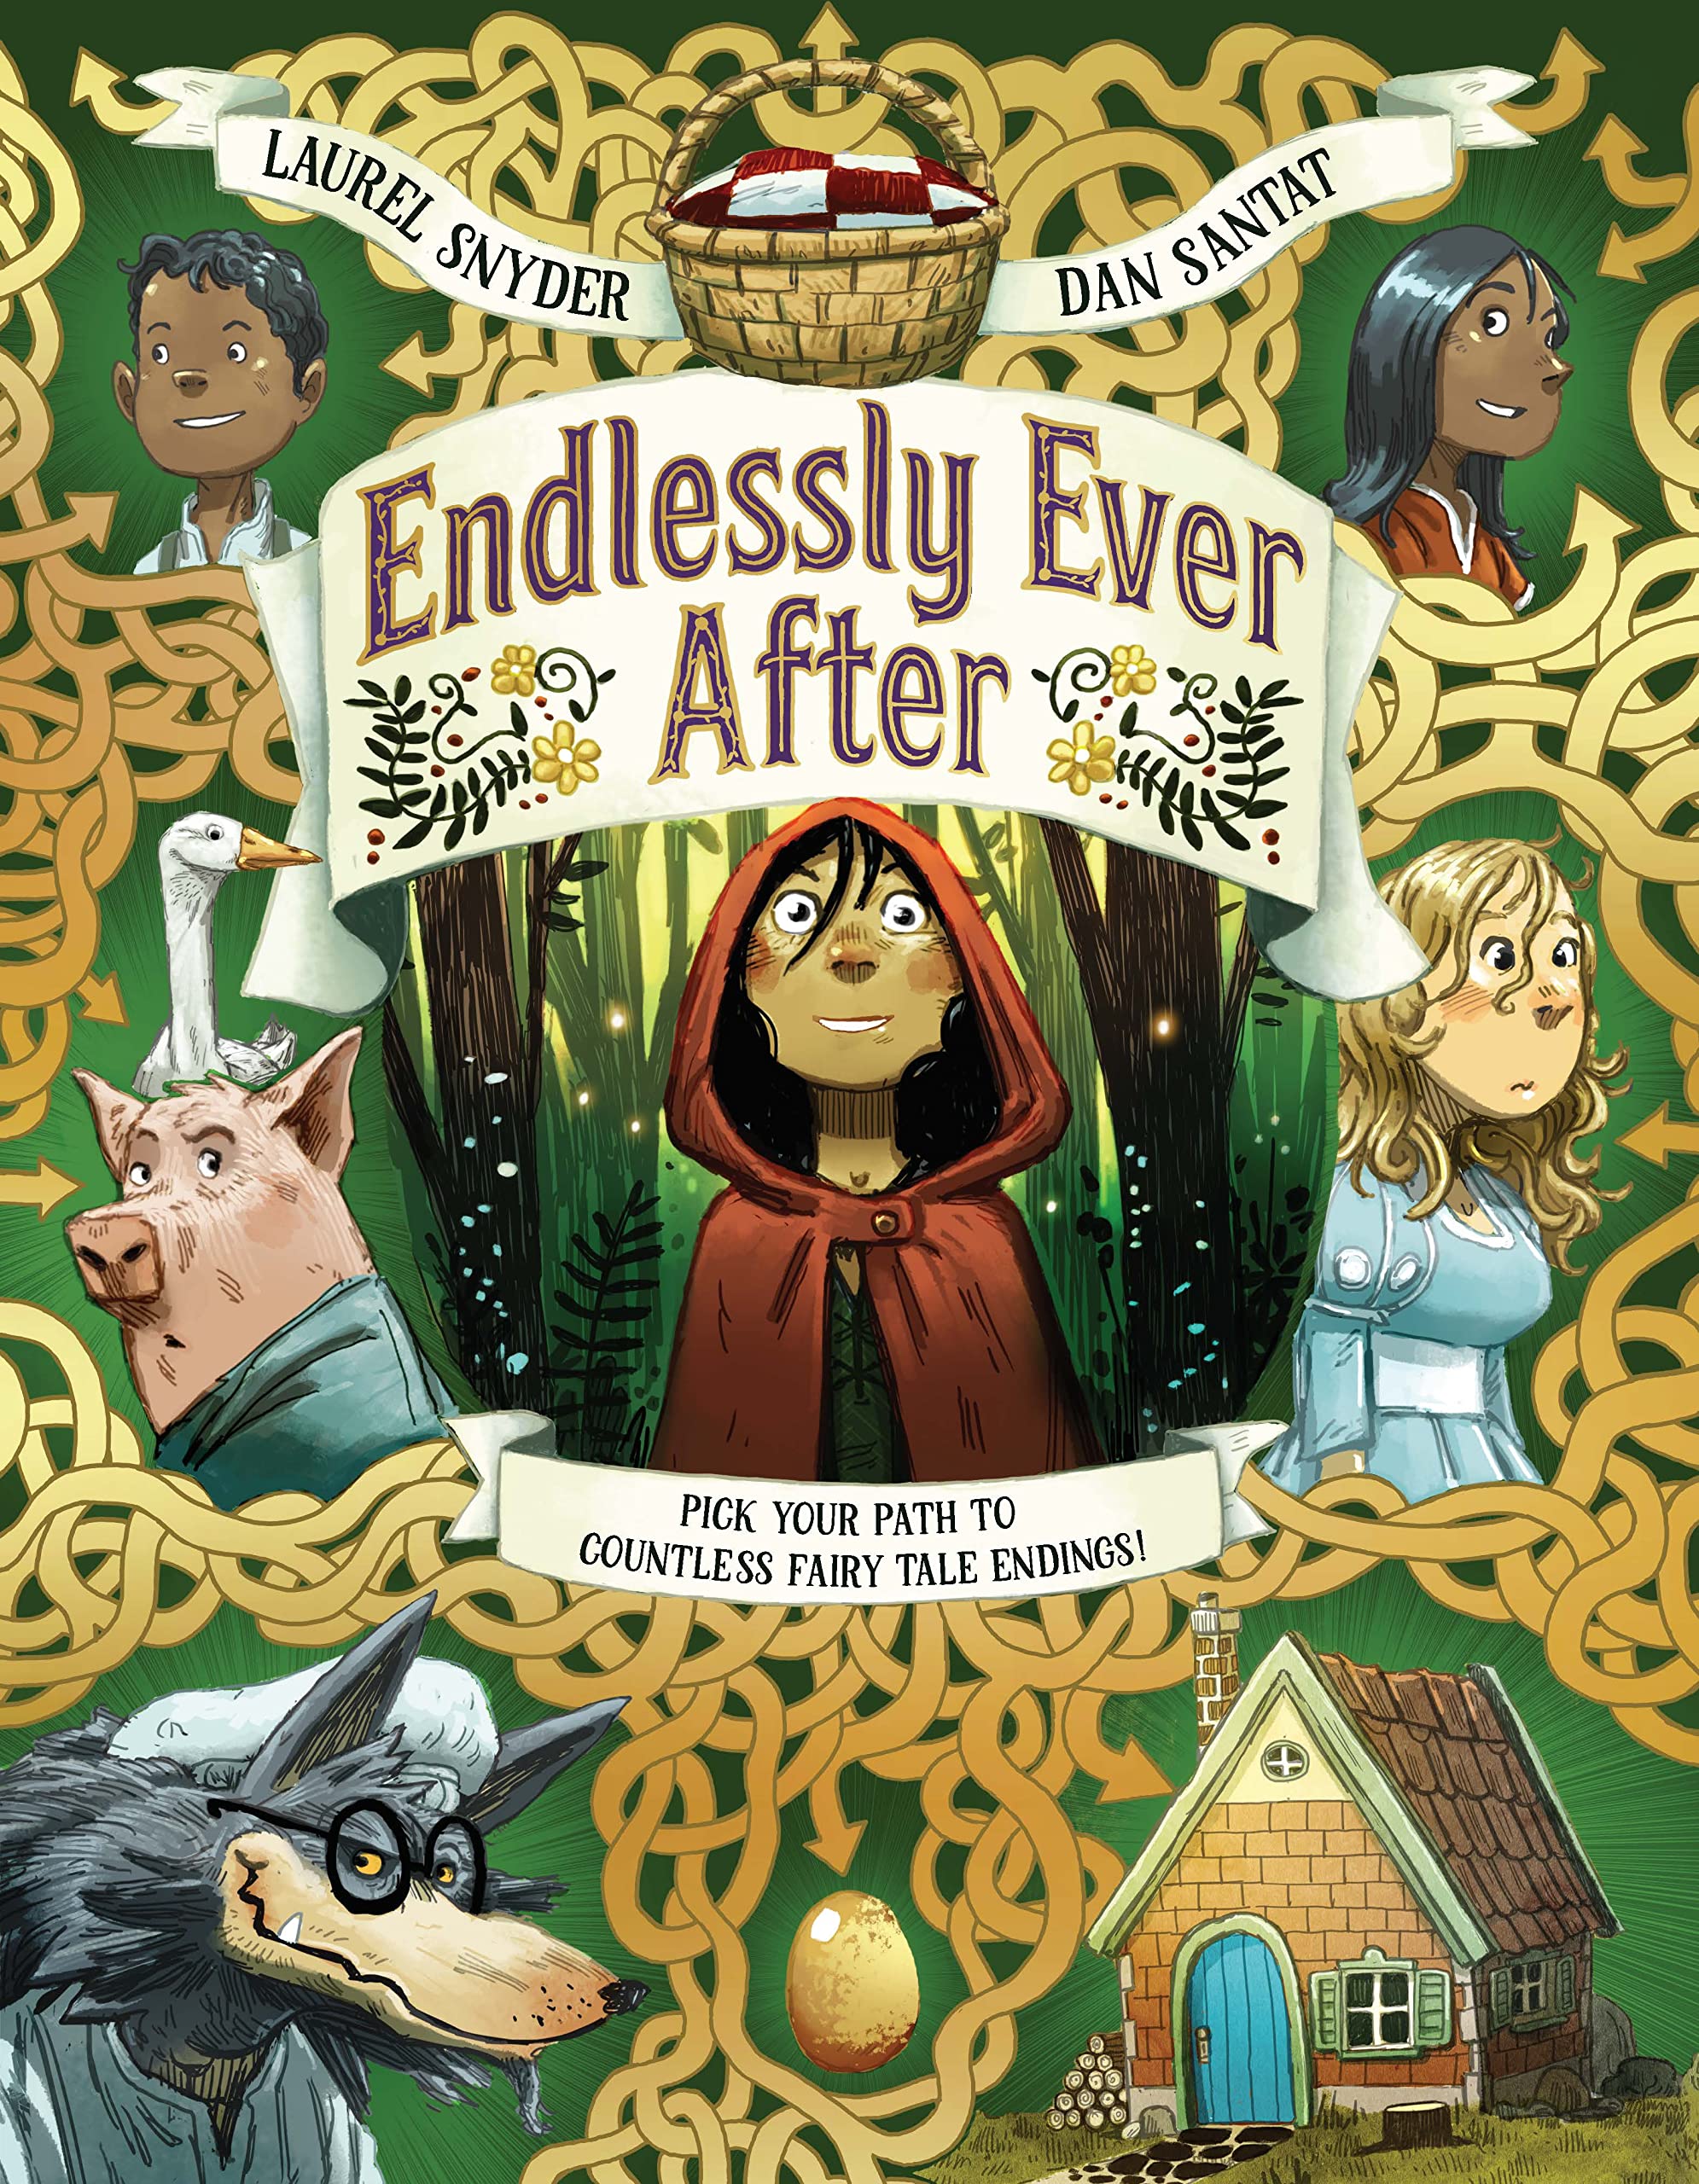 A picture book cover depicting Little Red Riding Hood in a forest, surrounded by twisting, gold-foil arrows with spot illustrations of fairy tale characters (such as Rapunzel, Hansel and Gretel, a Little Pig, and the Big Bad Wolf) inlaid against a deep green background.